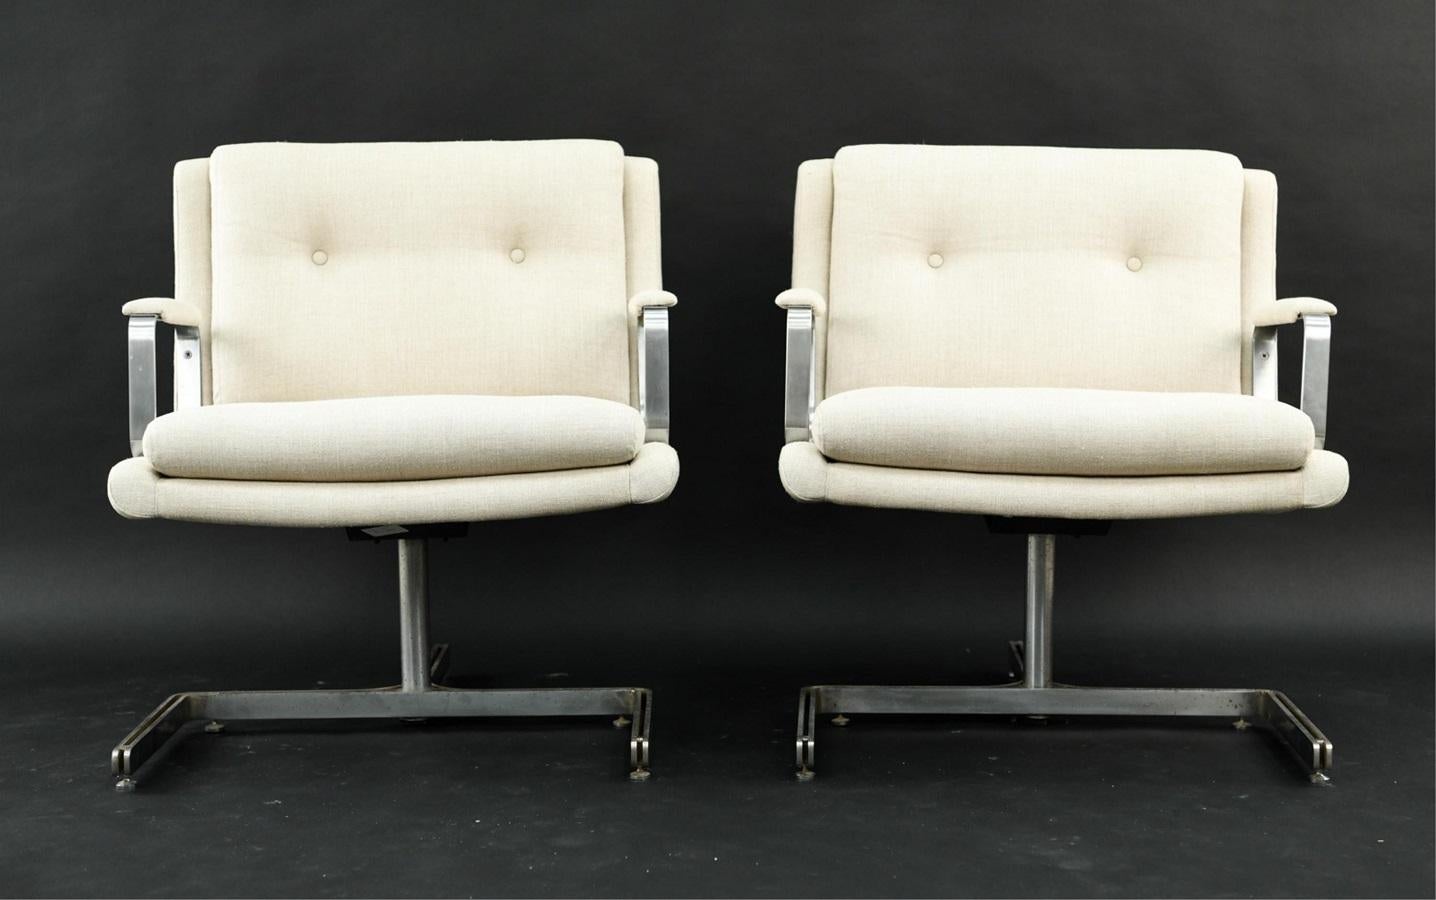 Pair of 1974 Raphael Raffel armchairs. The chairs have an off-white linen blend upholstery with a stainless steel tripod shaped frame.